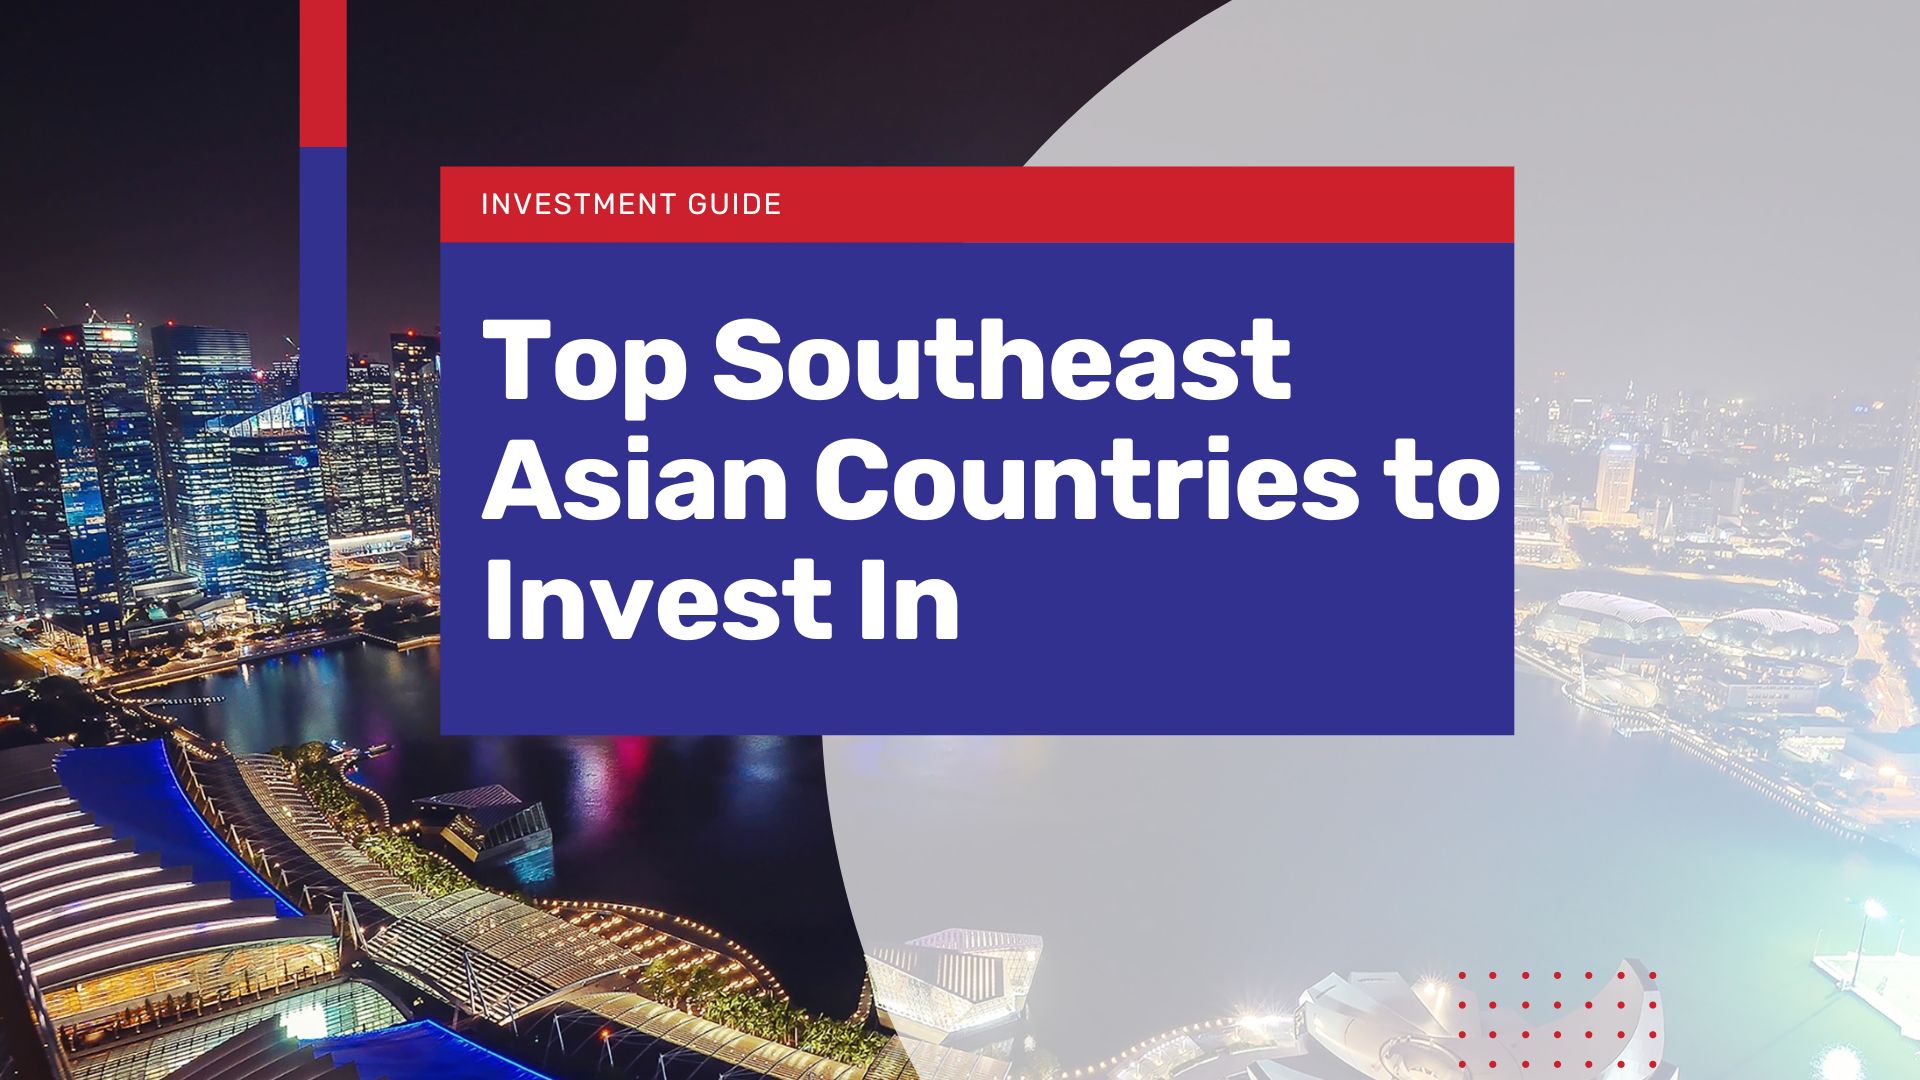 Investment Guide to Southeast Asia, Top Opportunities by Country